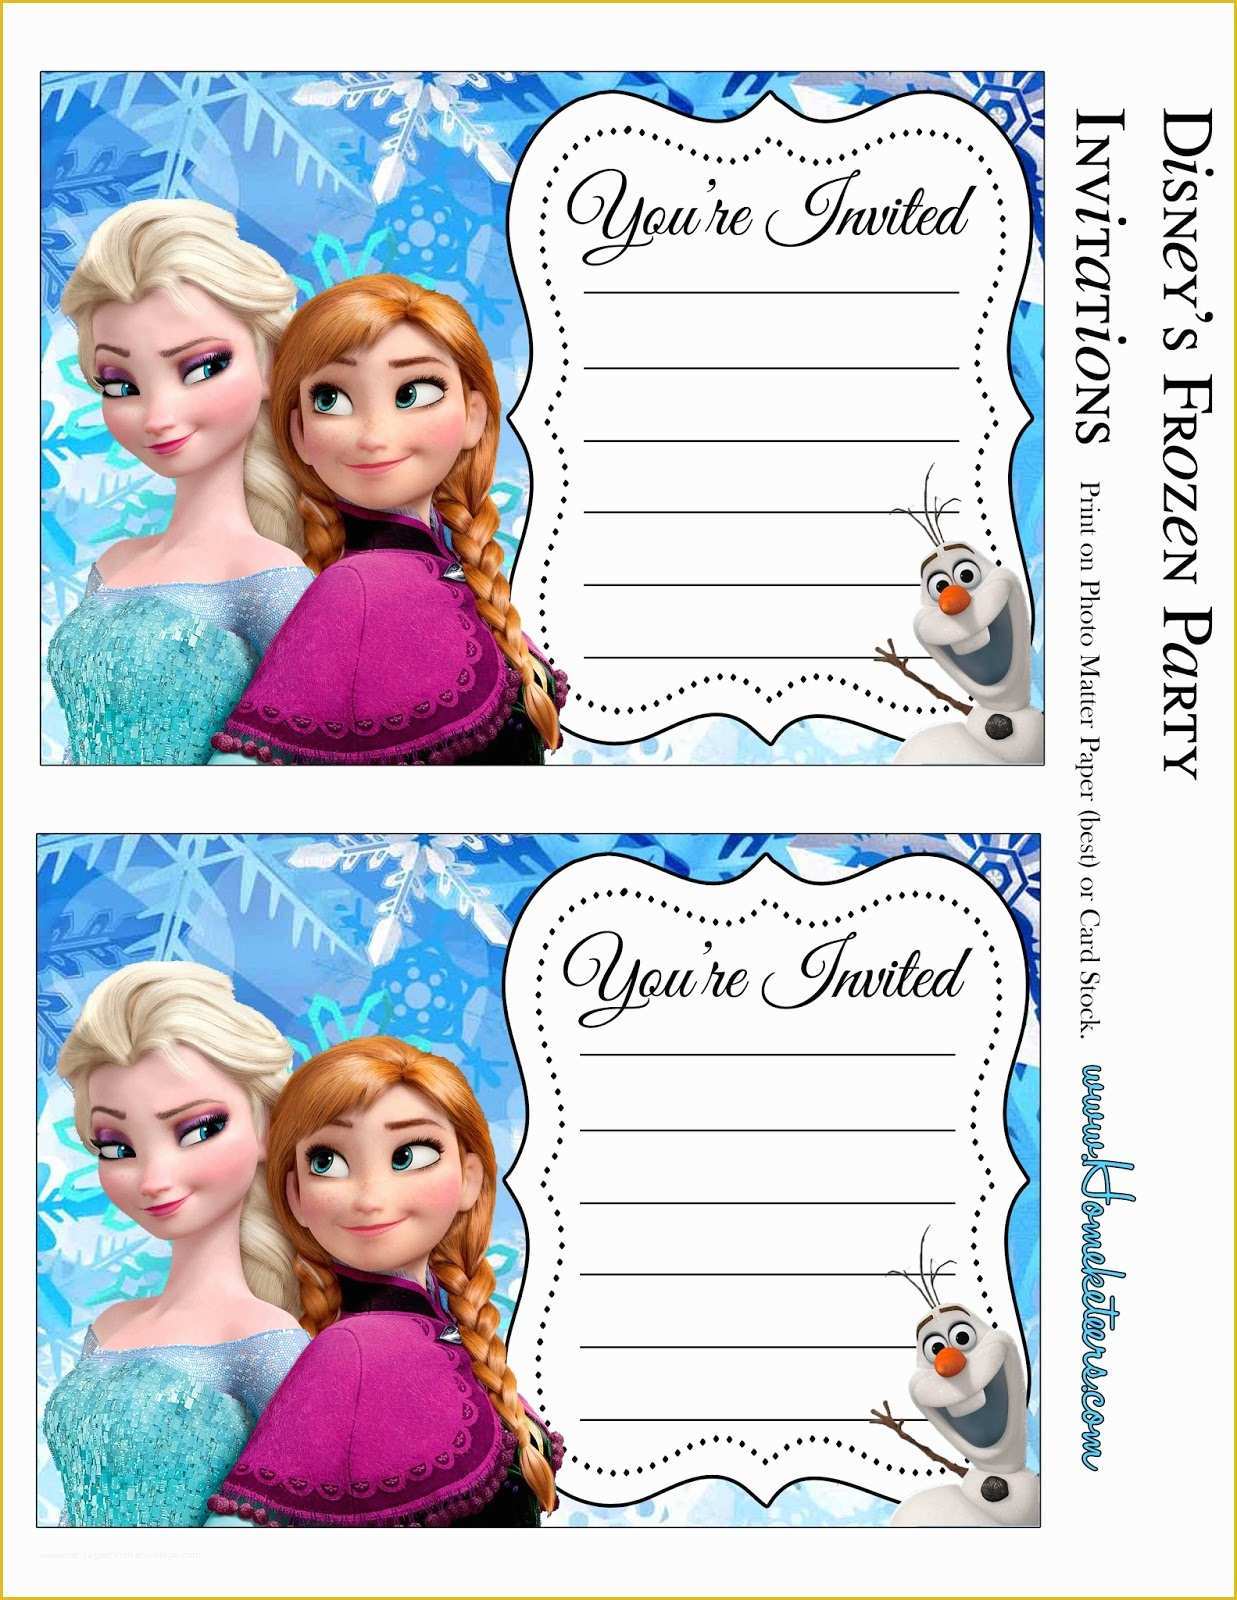 Free Printable Frozen Invitations Templates Of Frozen Party Free Printable Invitations